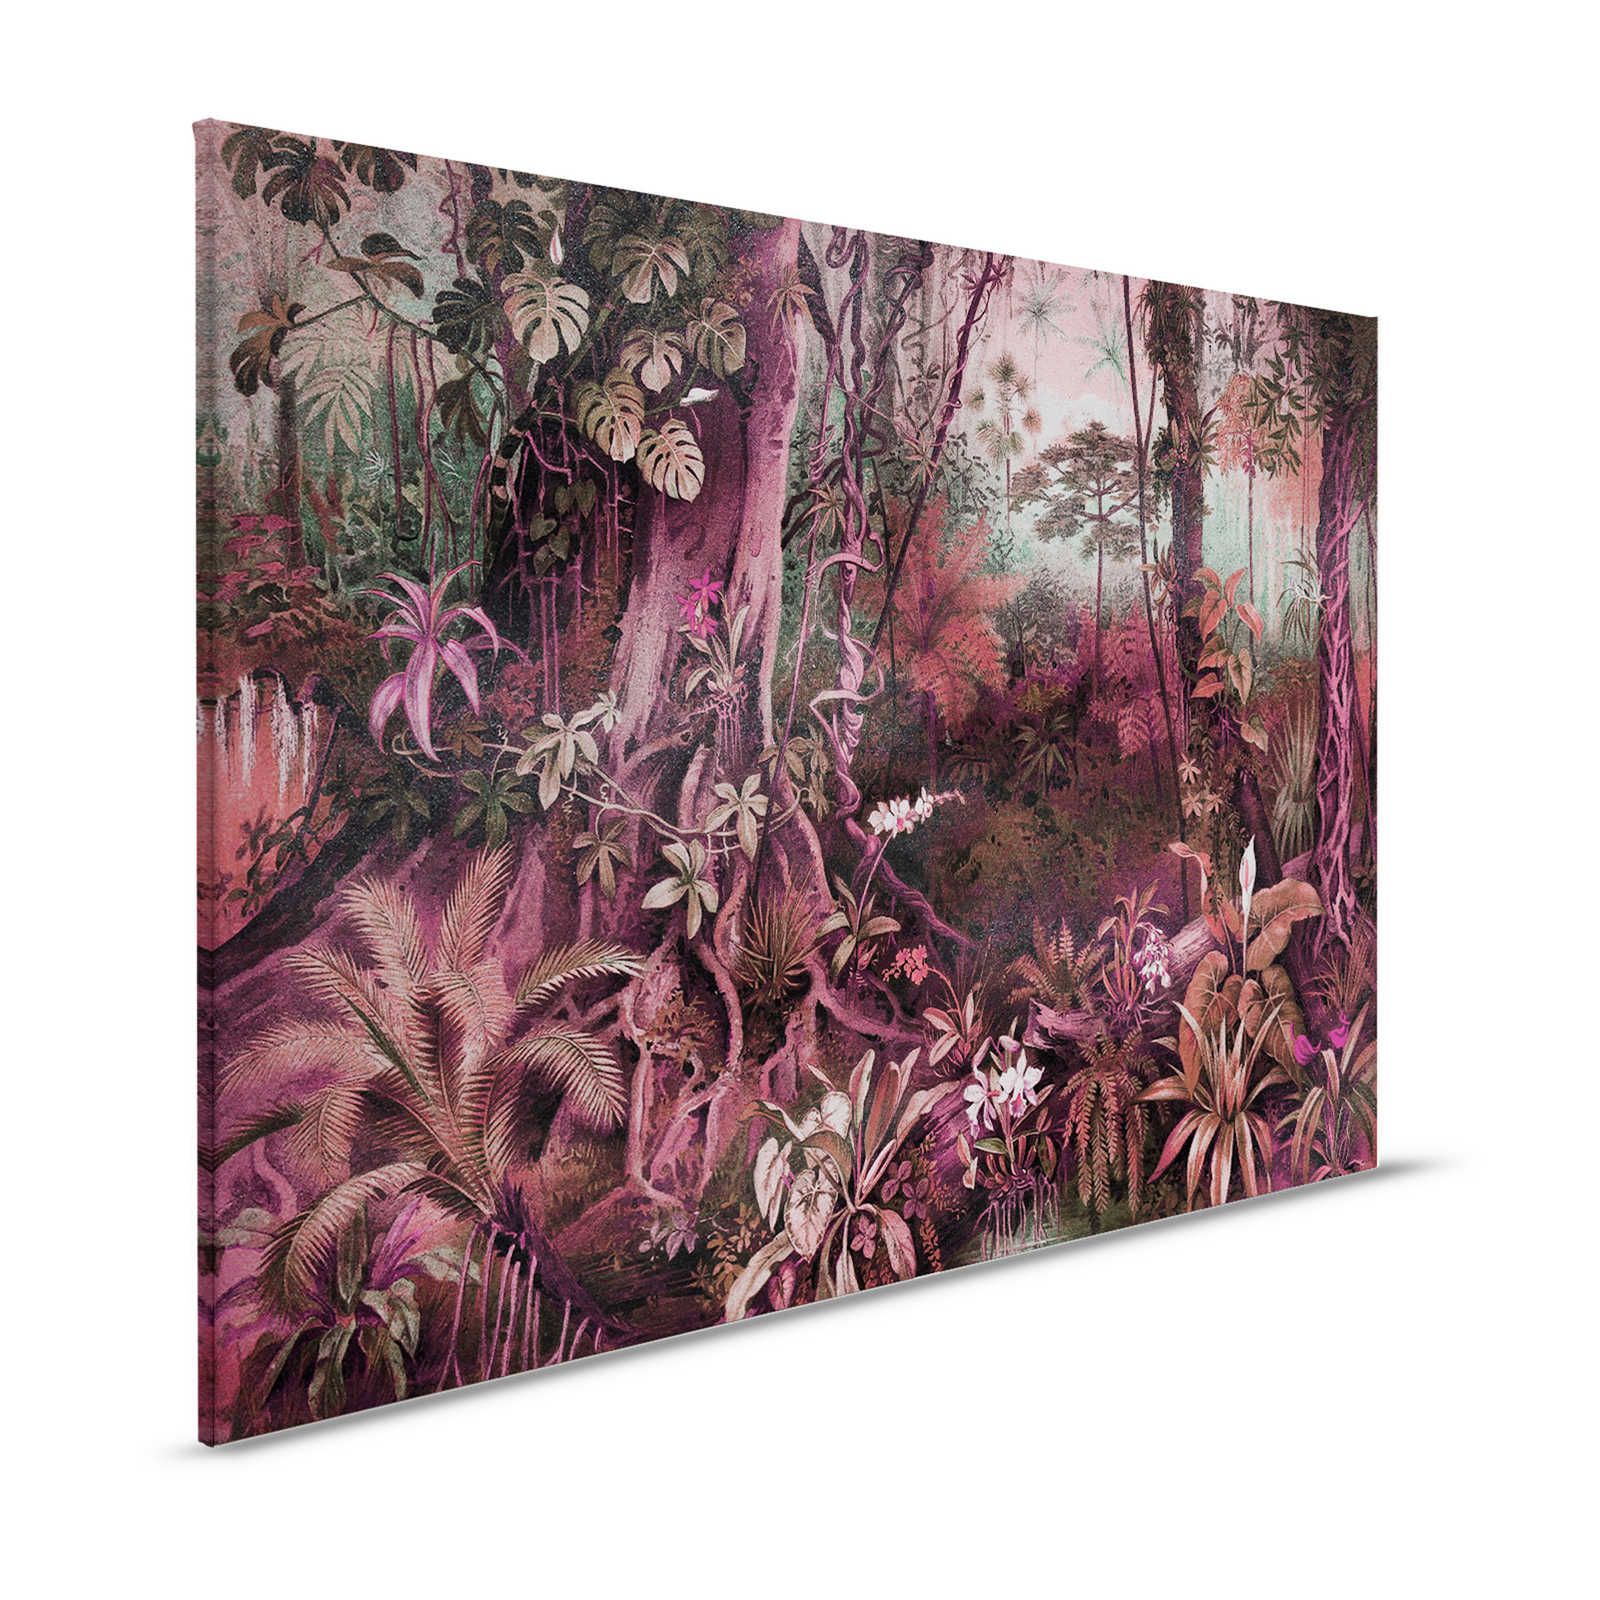 Canvas painting Jungle Motif with Leaves - 1.20 m x 0.80 m
